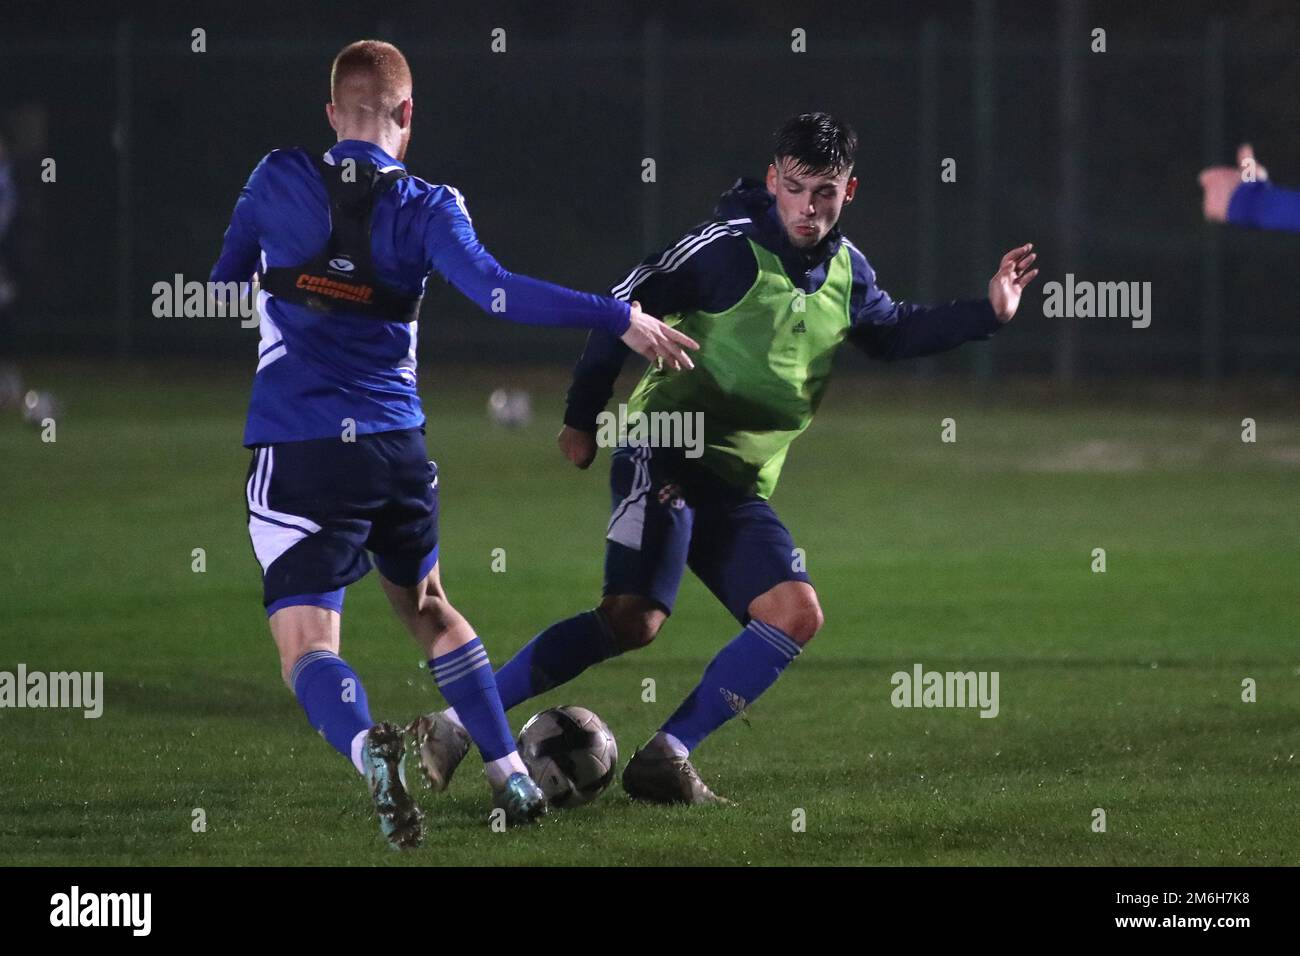 Daniel Stefulj at the evening training of GNK Dinamo in Rovinj, Croatia on January 3, 2023. The first team of GNK Dinamo is in Rovinj, where they are making final preparations for the second part of the 2022/23 season.  Photo: Luka Stanzl/PIXSELL Stock Photo